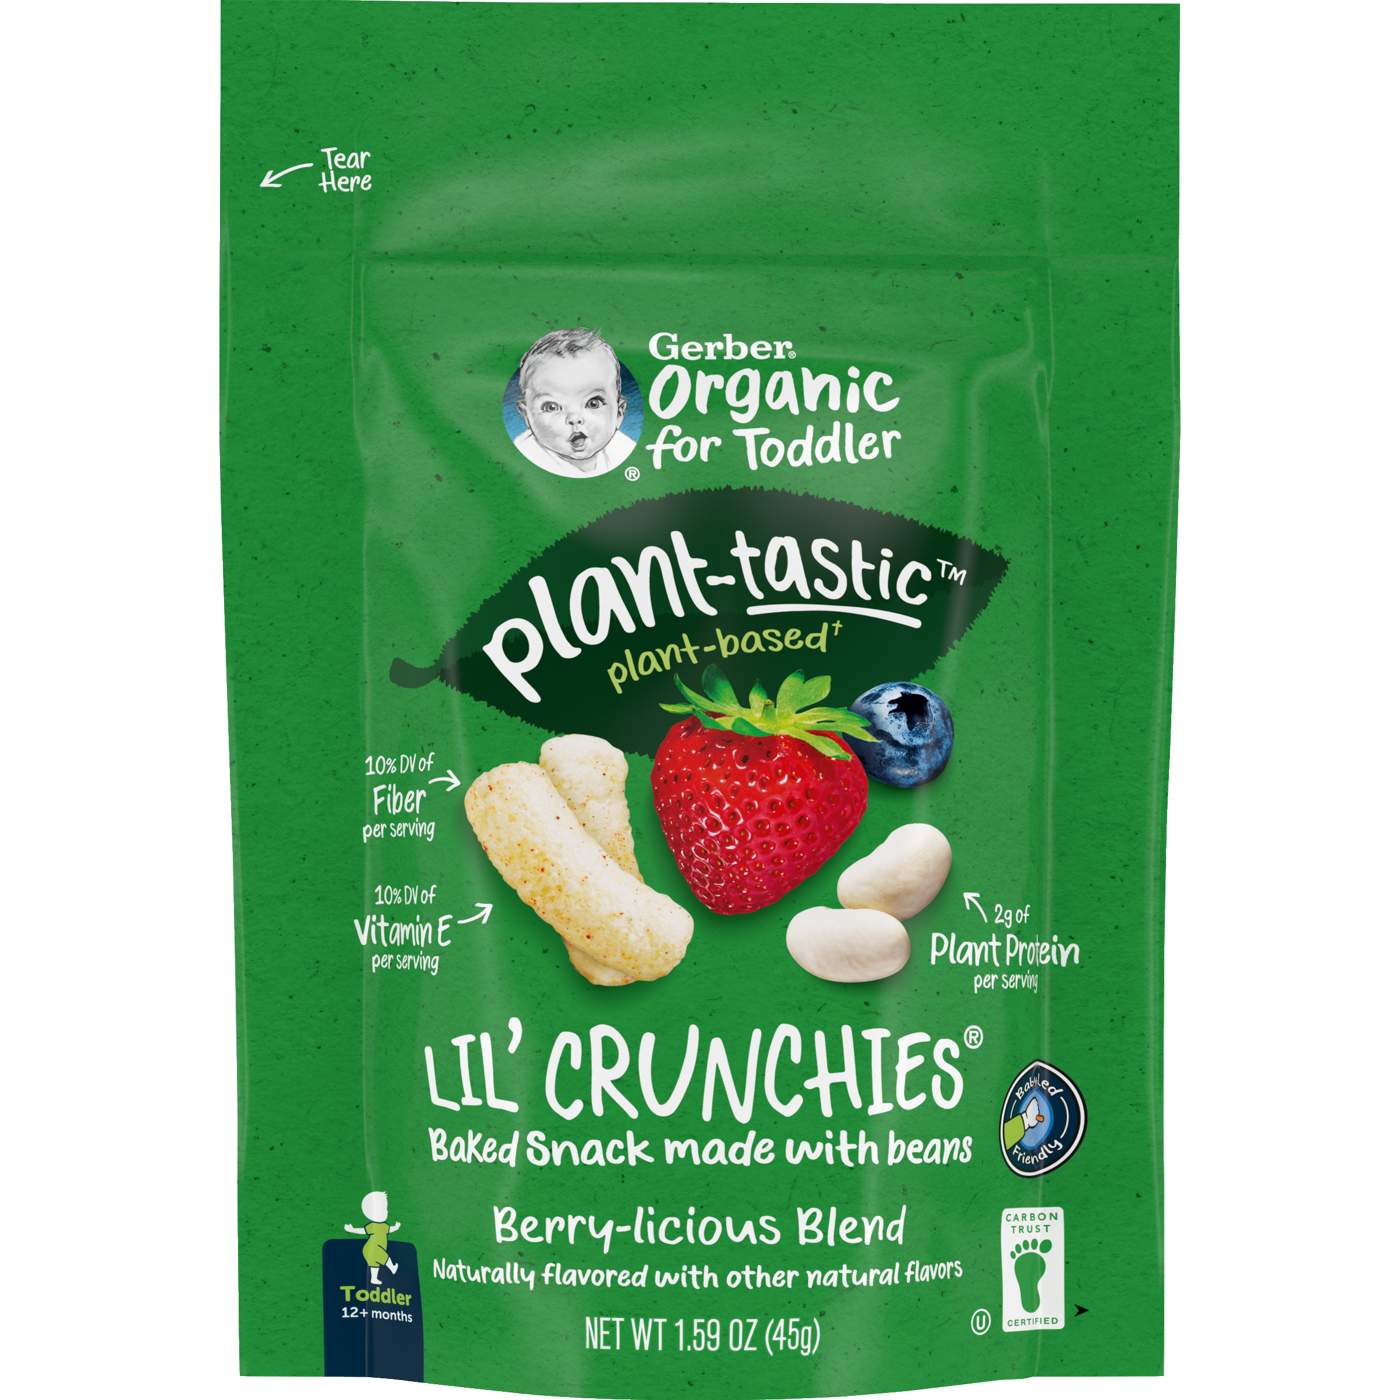 Gerber Organic for Toddler Lil' Crunchies - Berry-licious Blend; image 1 of 2